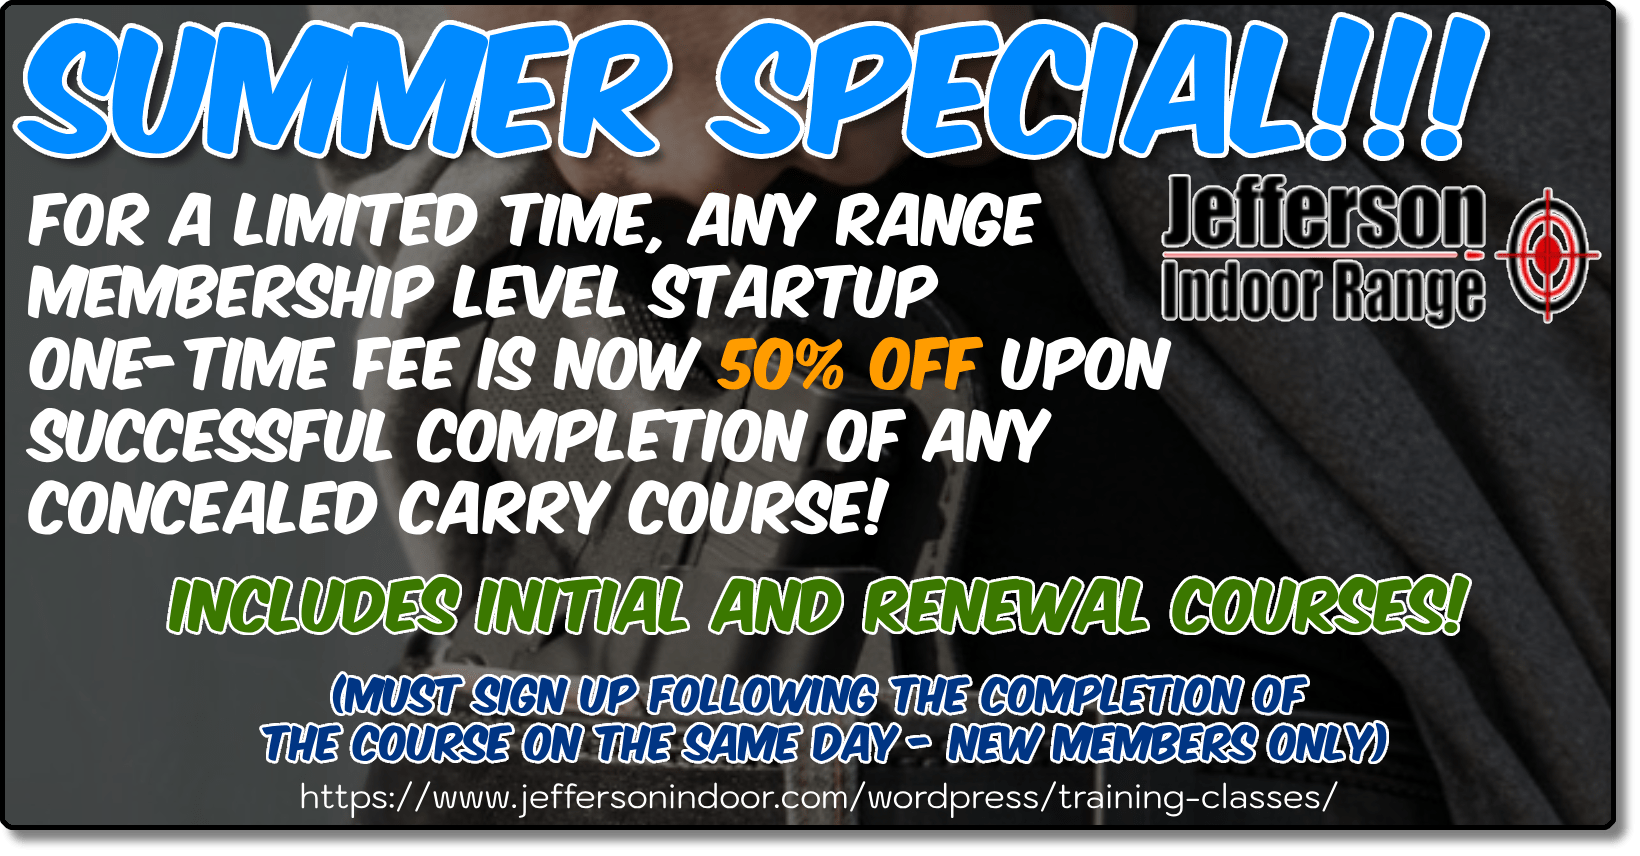 Complete a Concealed Carry training course and receive a 50% discount on any range membership startup fee when complete the course!